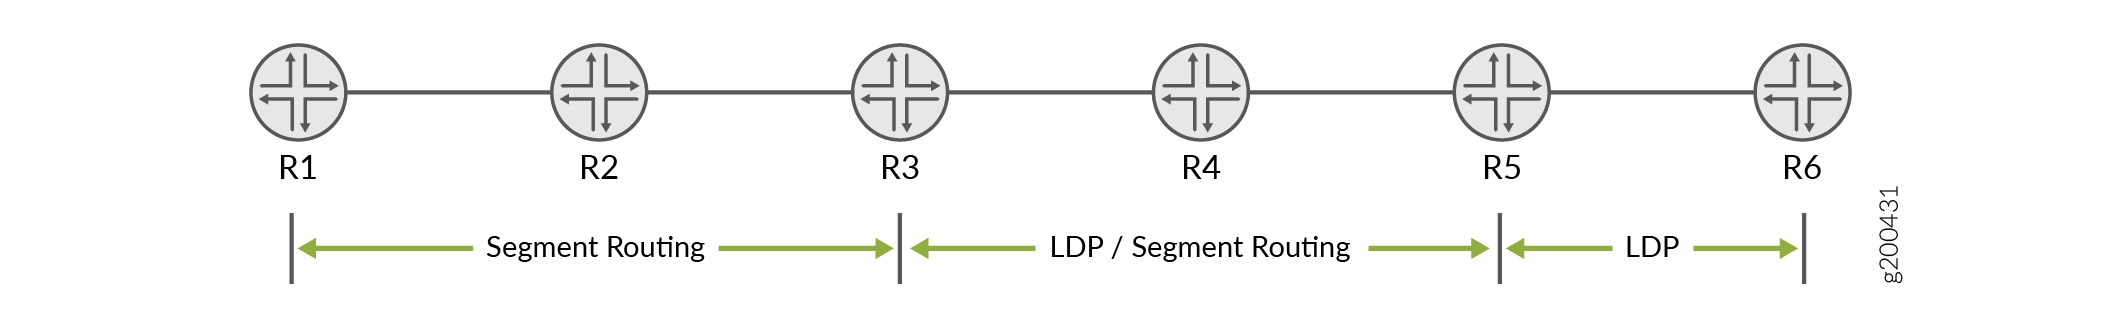 Sample LDP Topology with Interoperability of Segment Routing with LDP Using OSPF